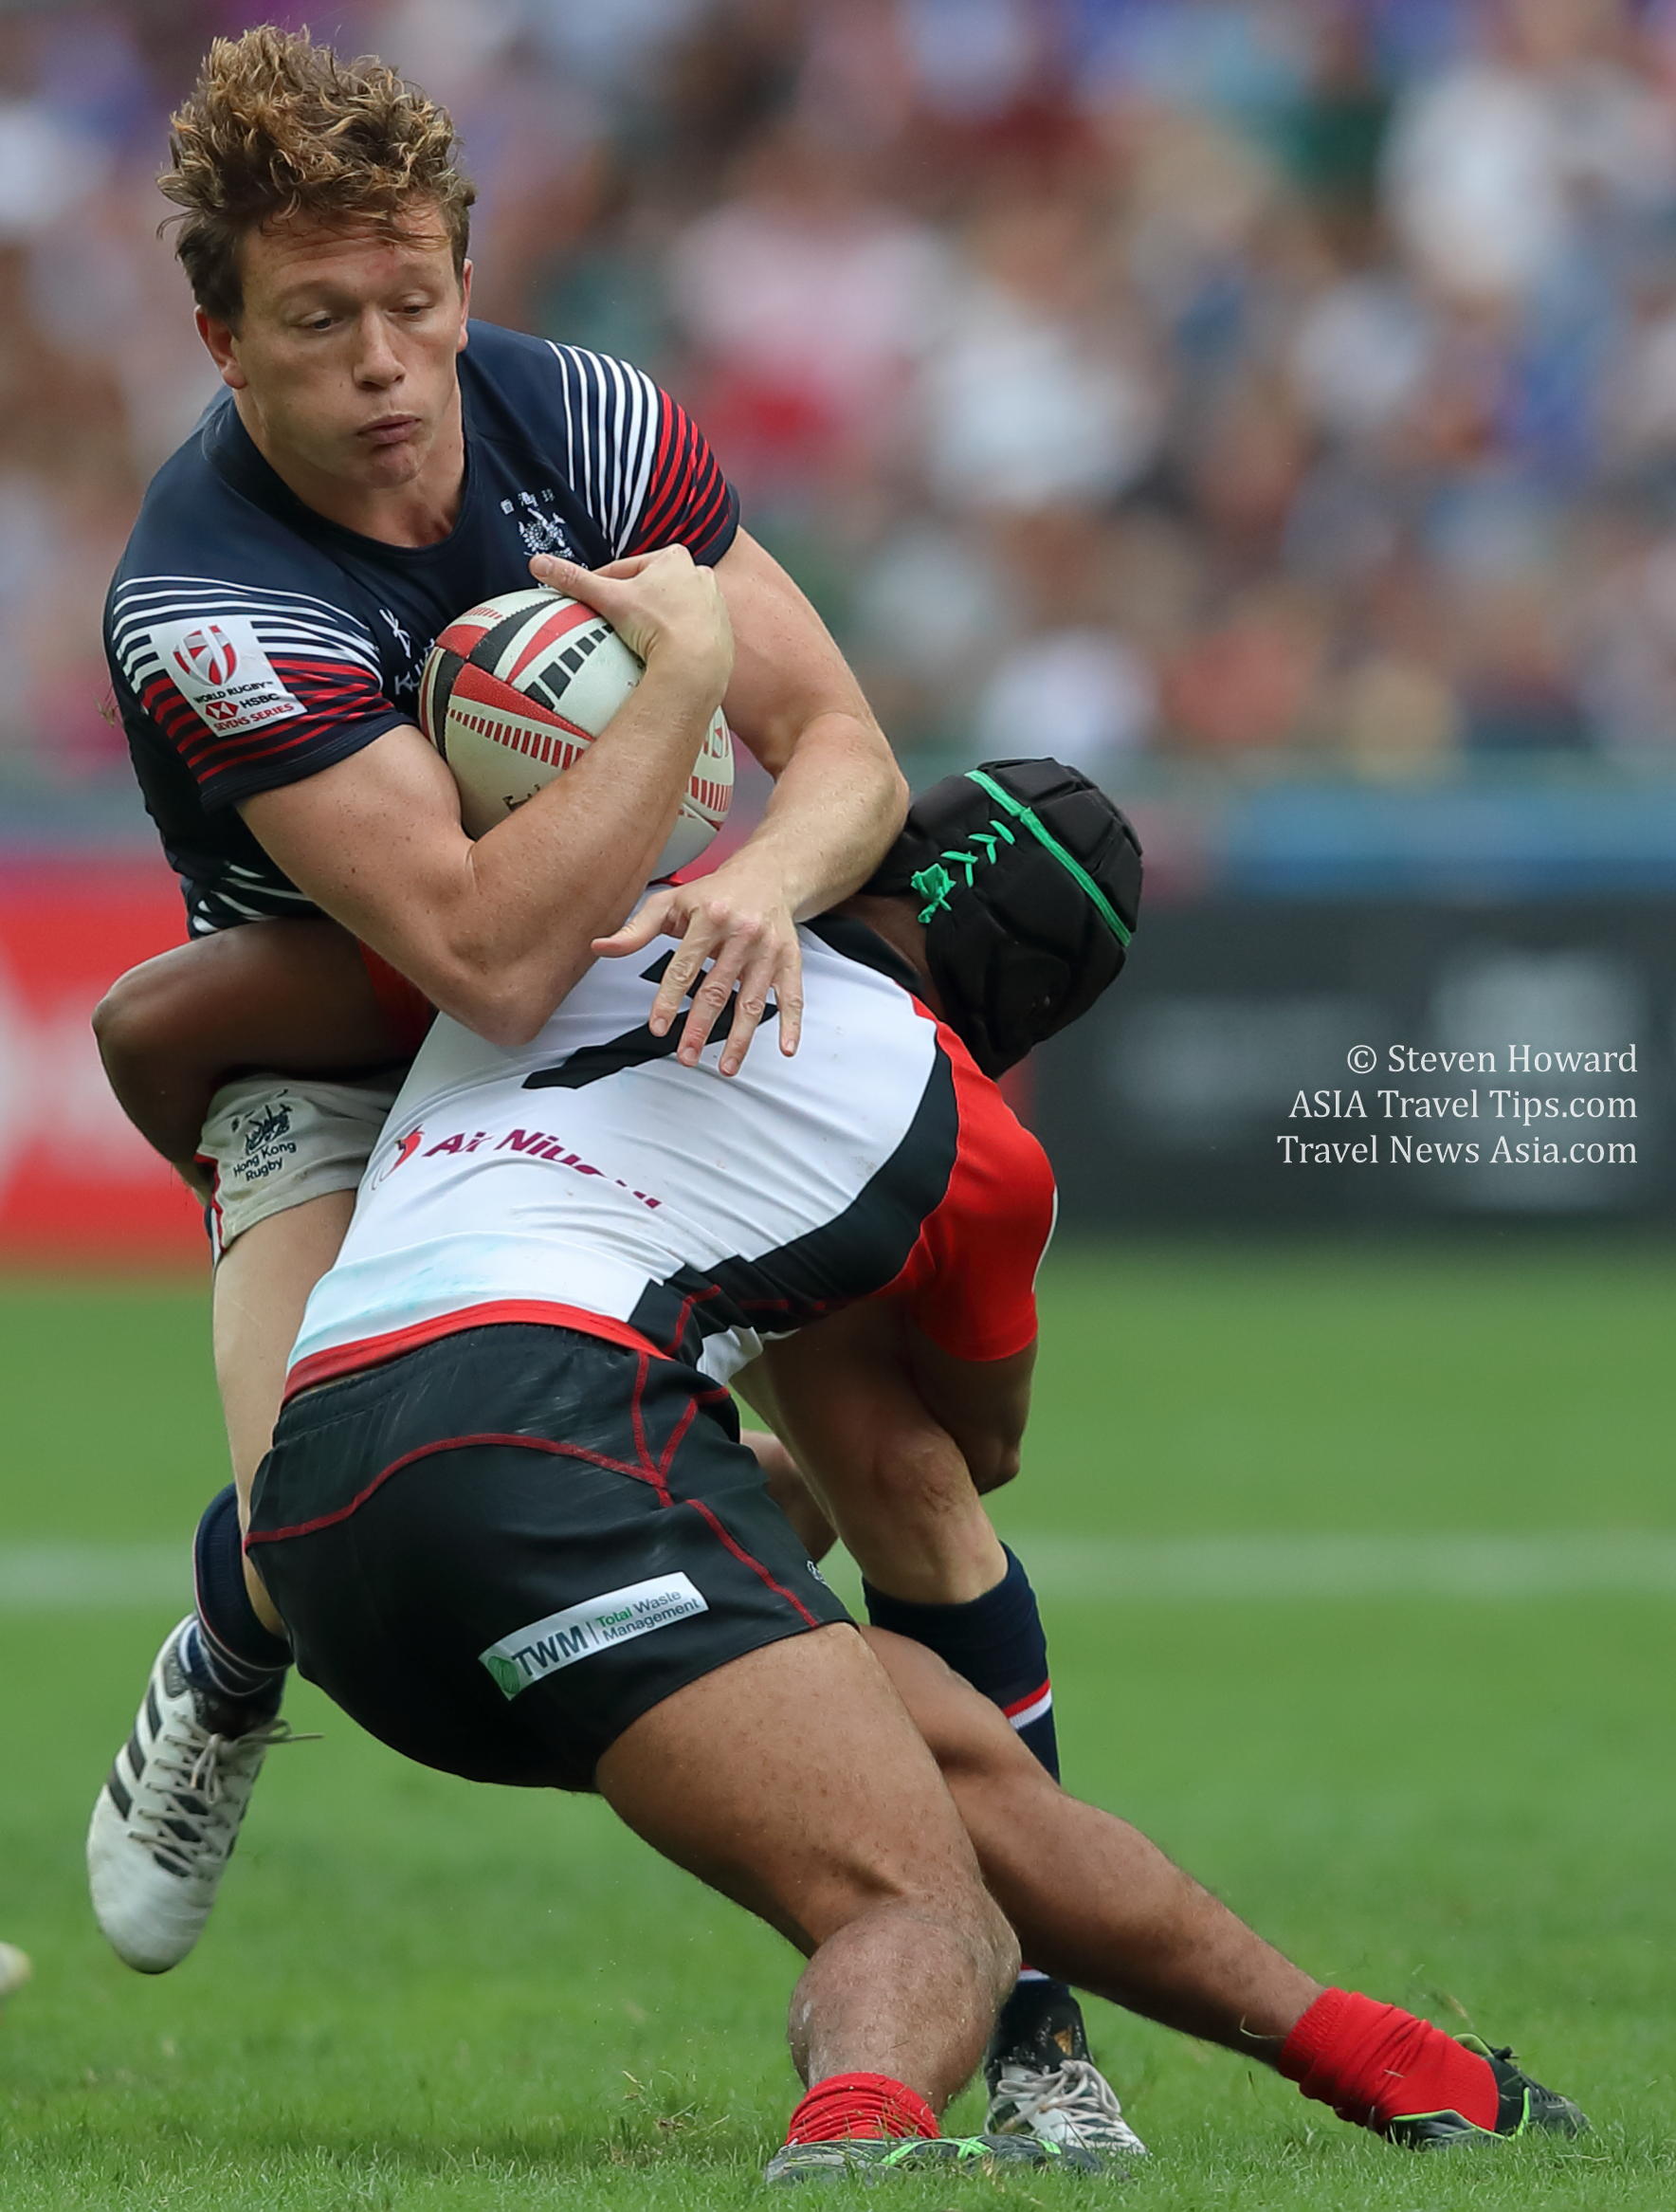 Hong Kong in action at the 2018 Cathay Pacific / HSBC Hong Kong Sevens. Picture by Steven Howard of TravelNewsAsia.com Click to enlarge.